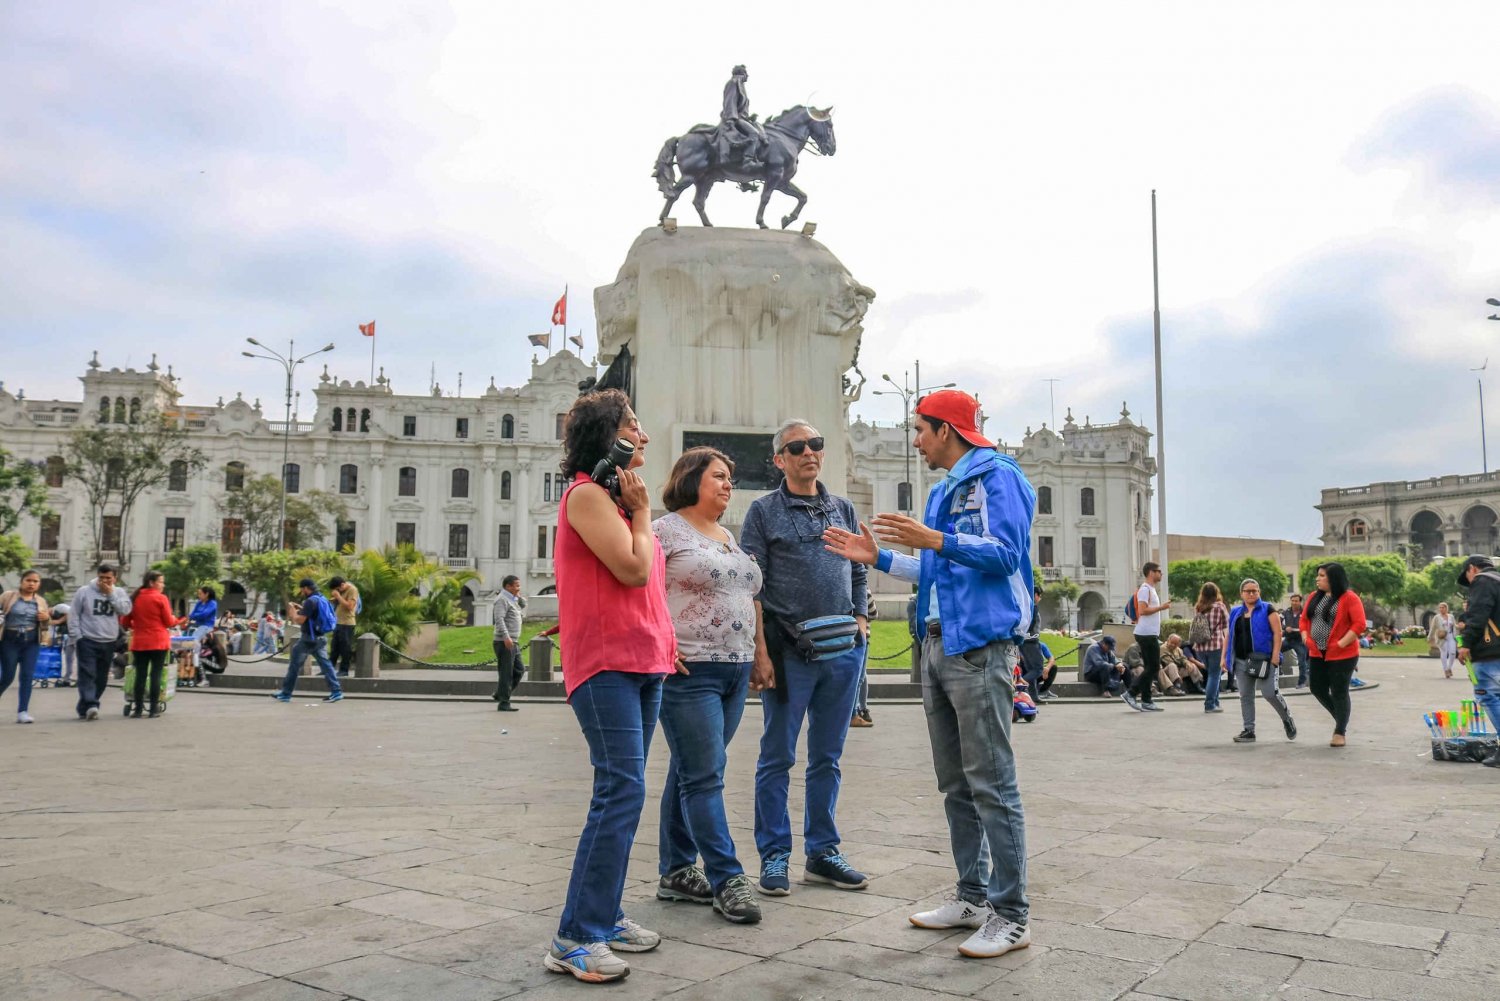 Best cultural tours in and around Lima, Peru